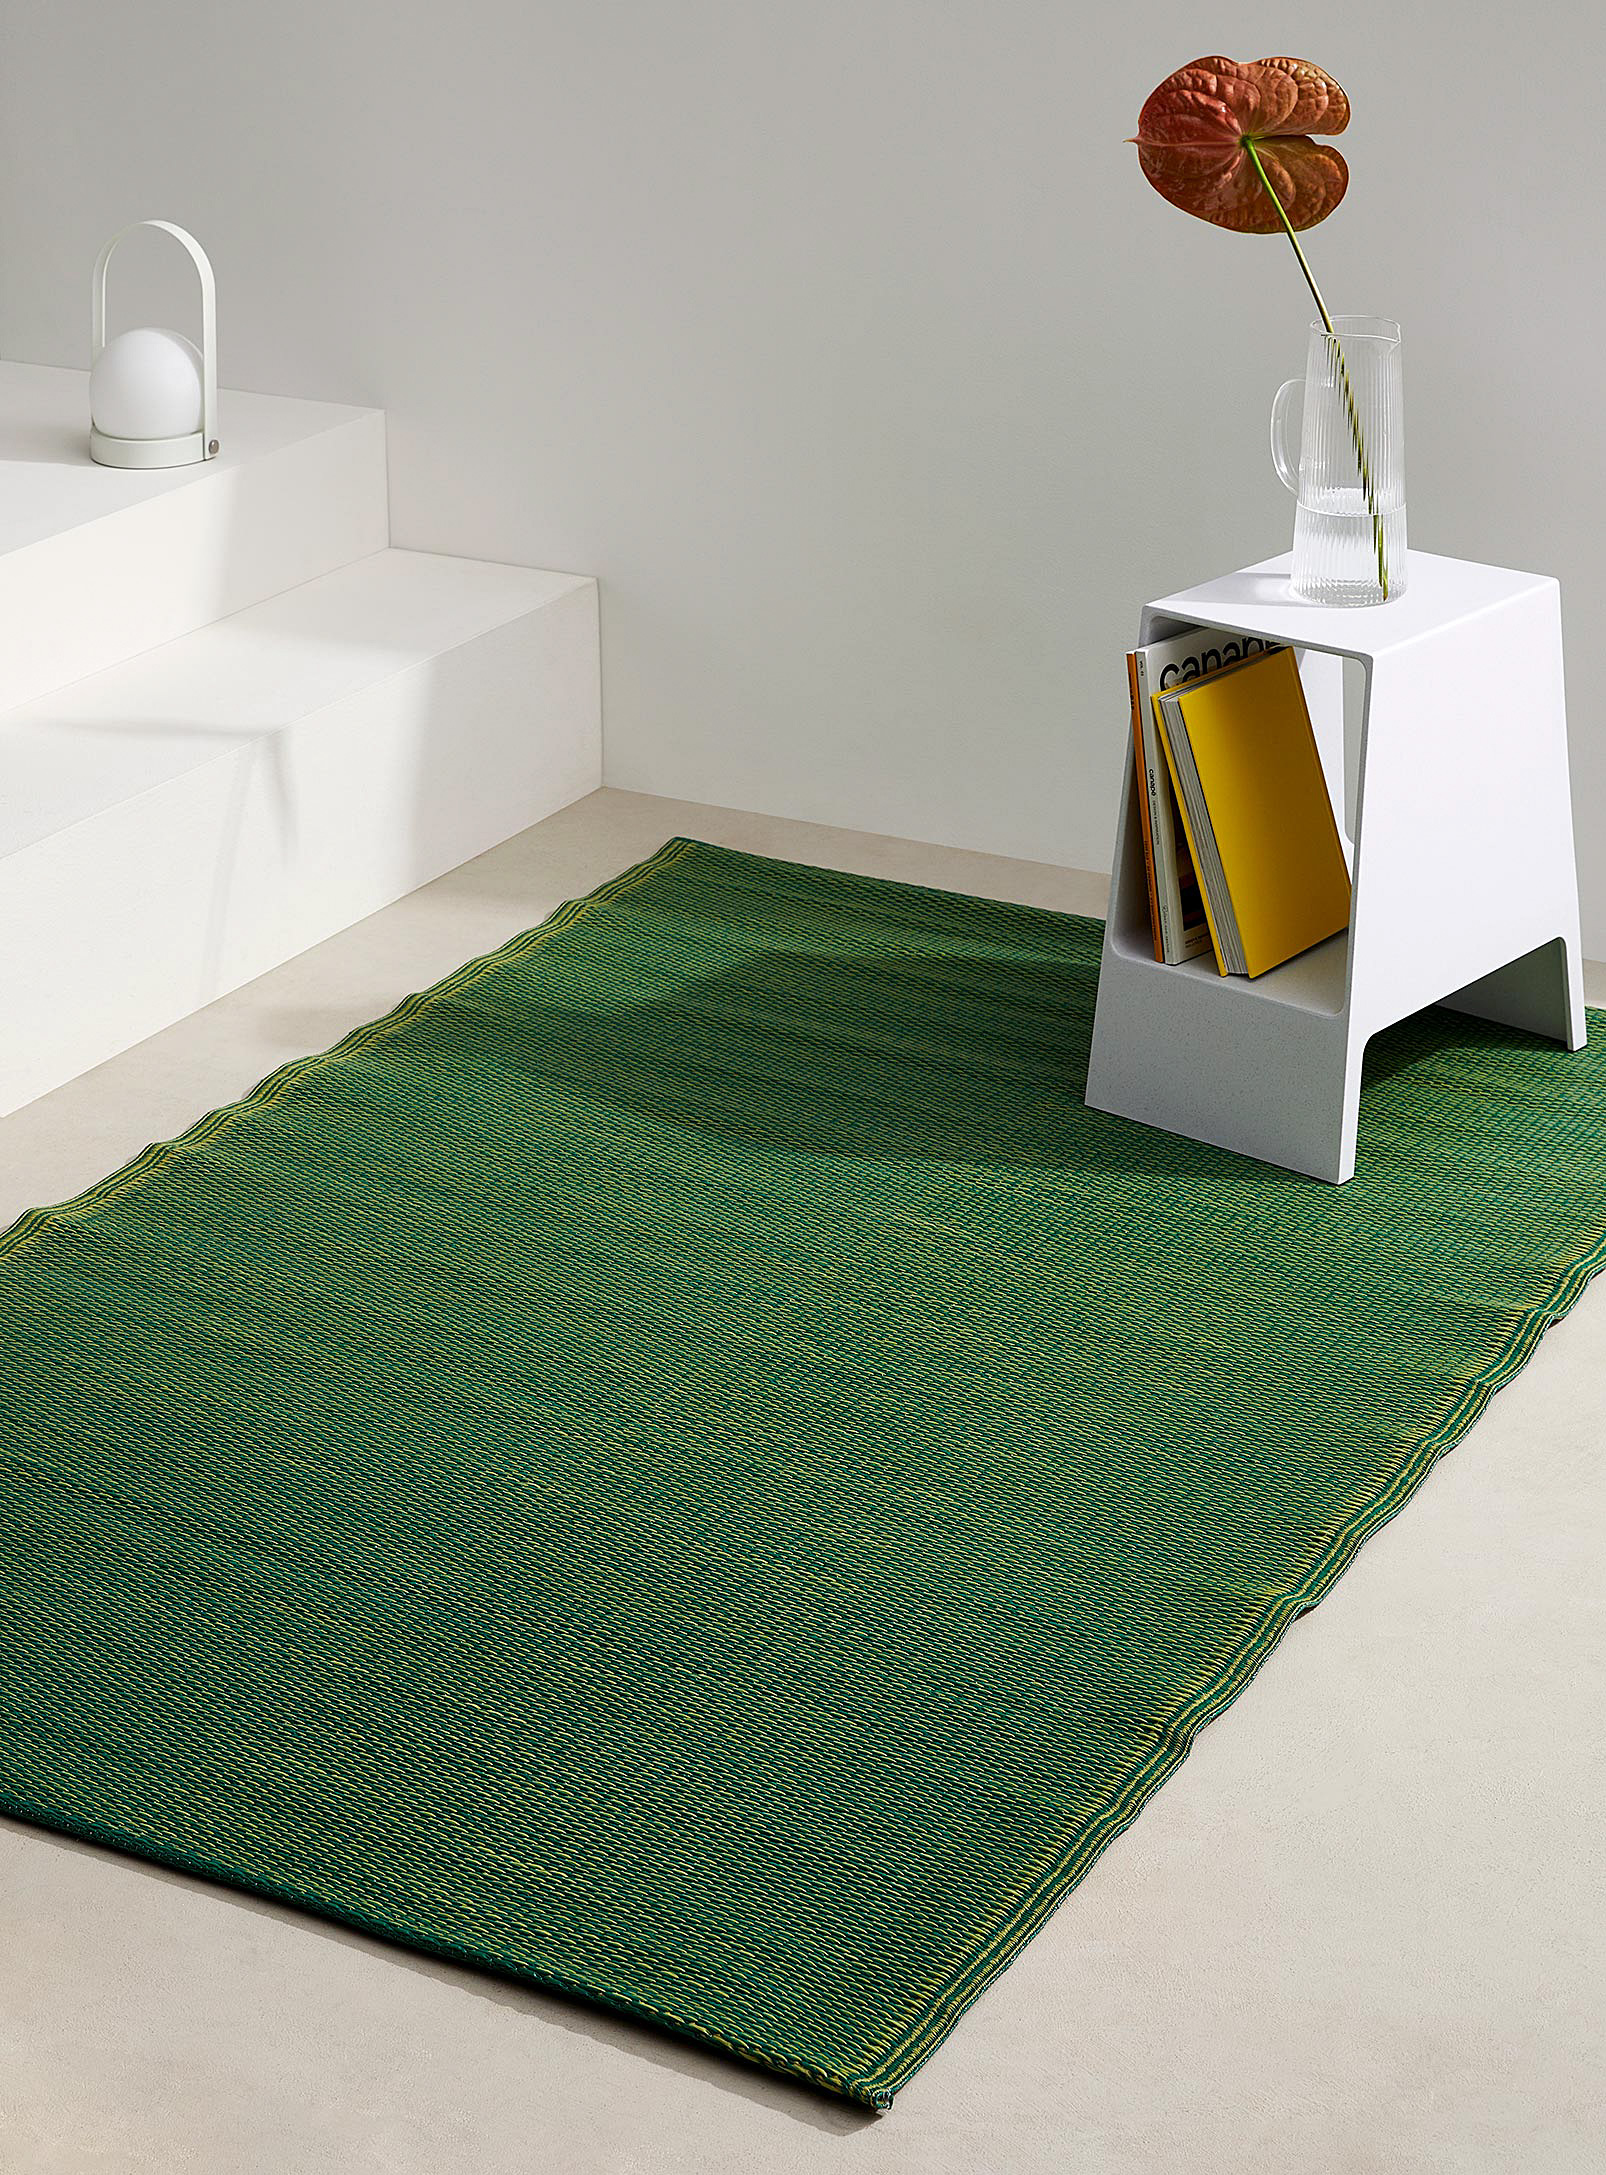 Simons Maison Heathered Outdoor Rug 120 X 180 Cm In Patterned Green